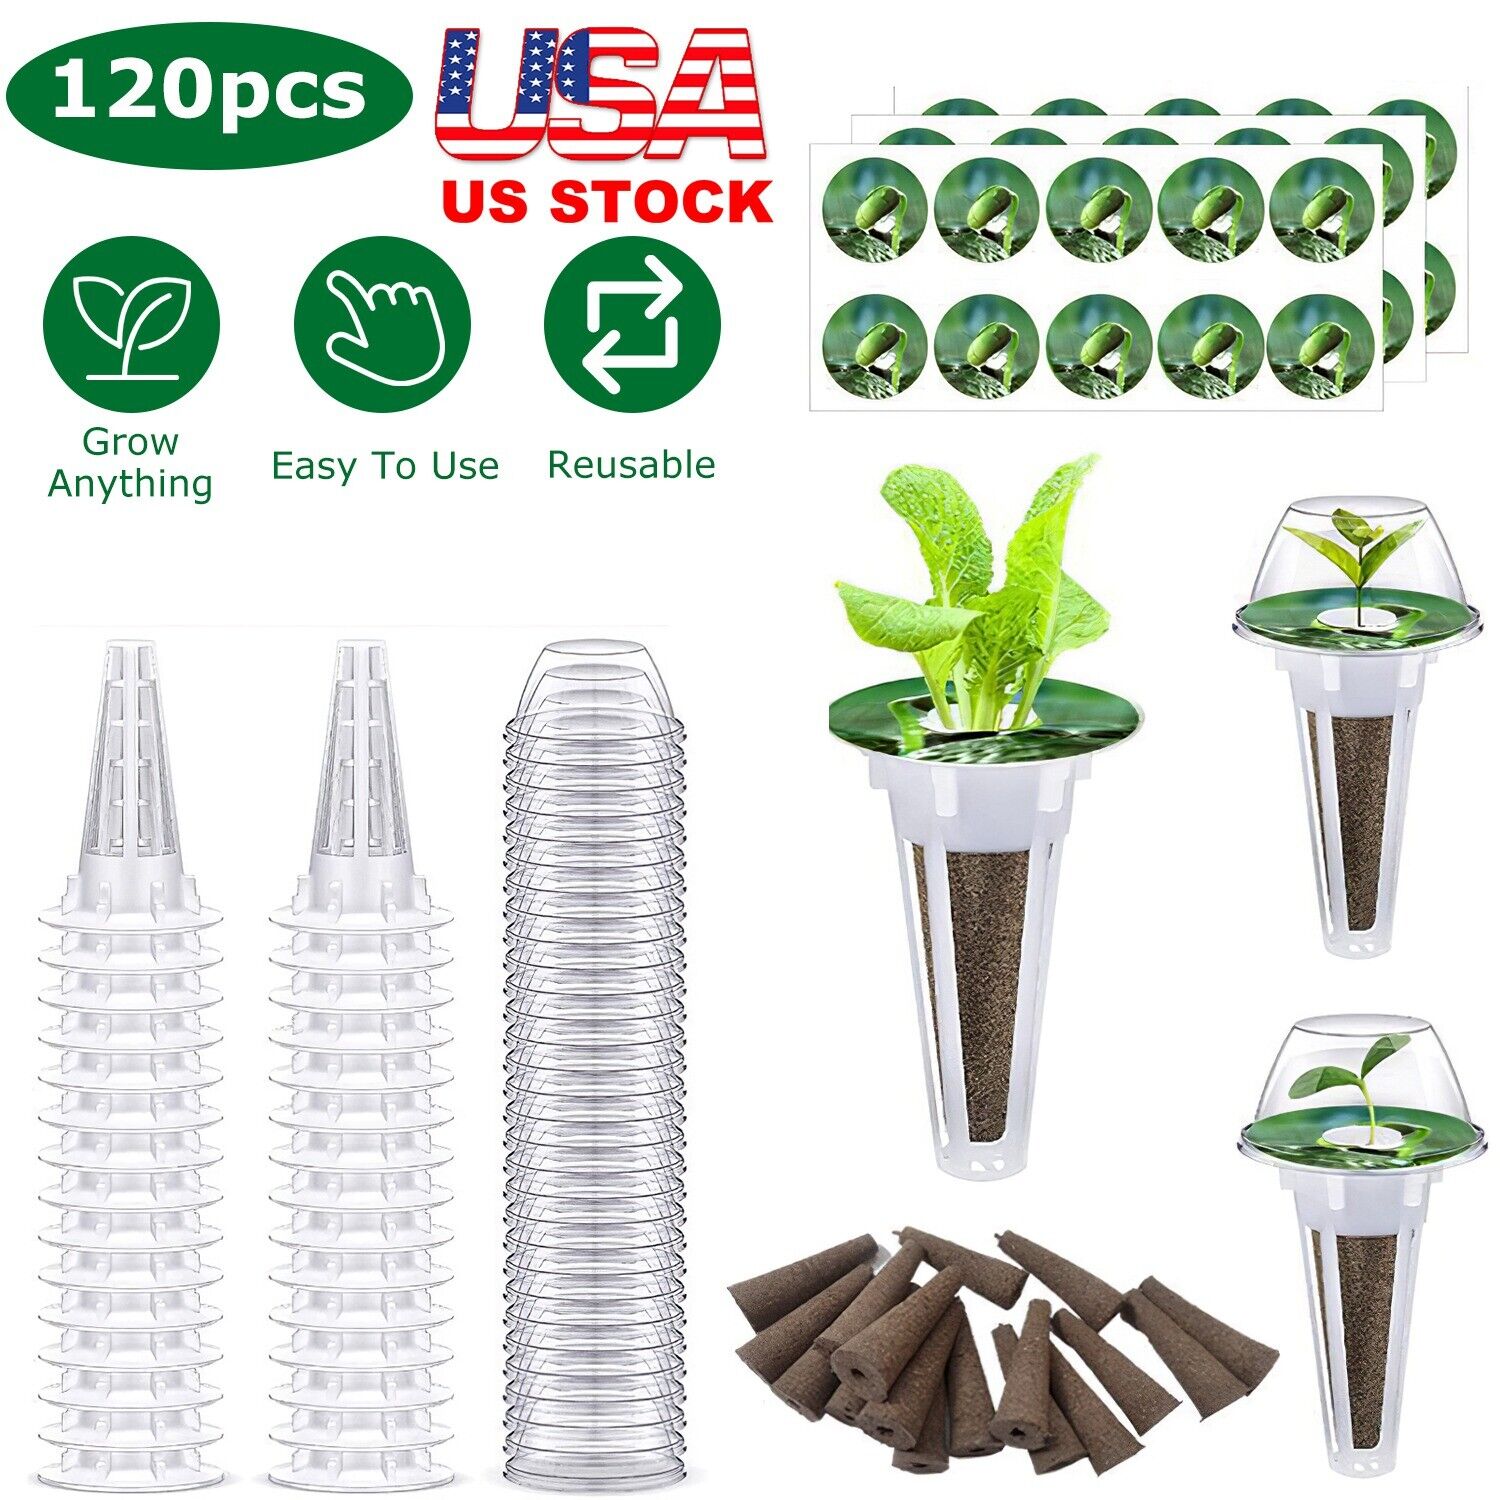 120Pcs Seed Pod Kit Hydroponic Garden Growing Containers Grow Anything Reusable